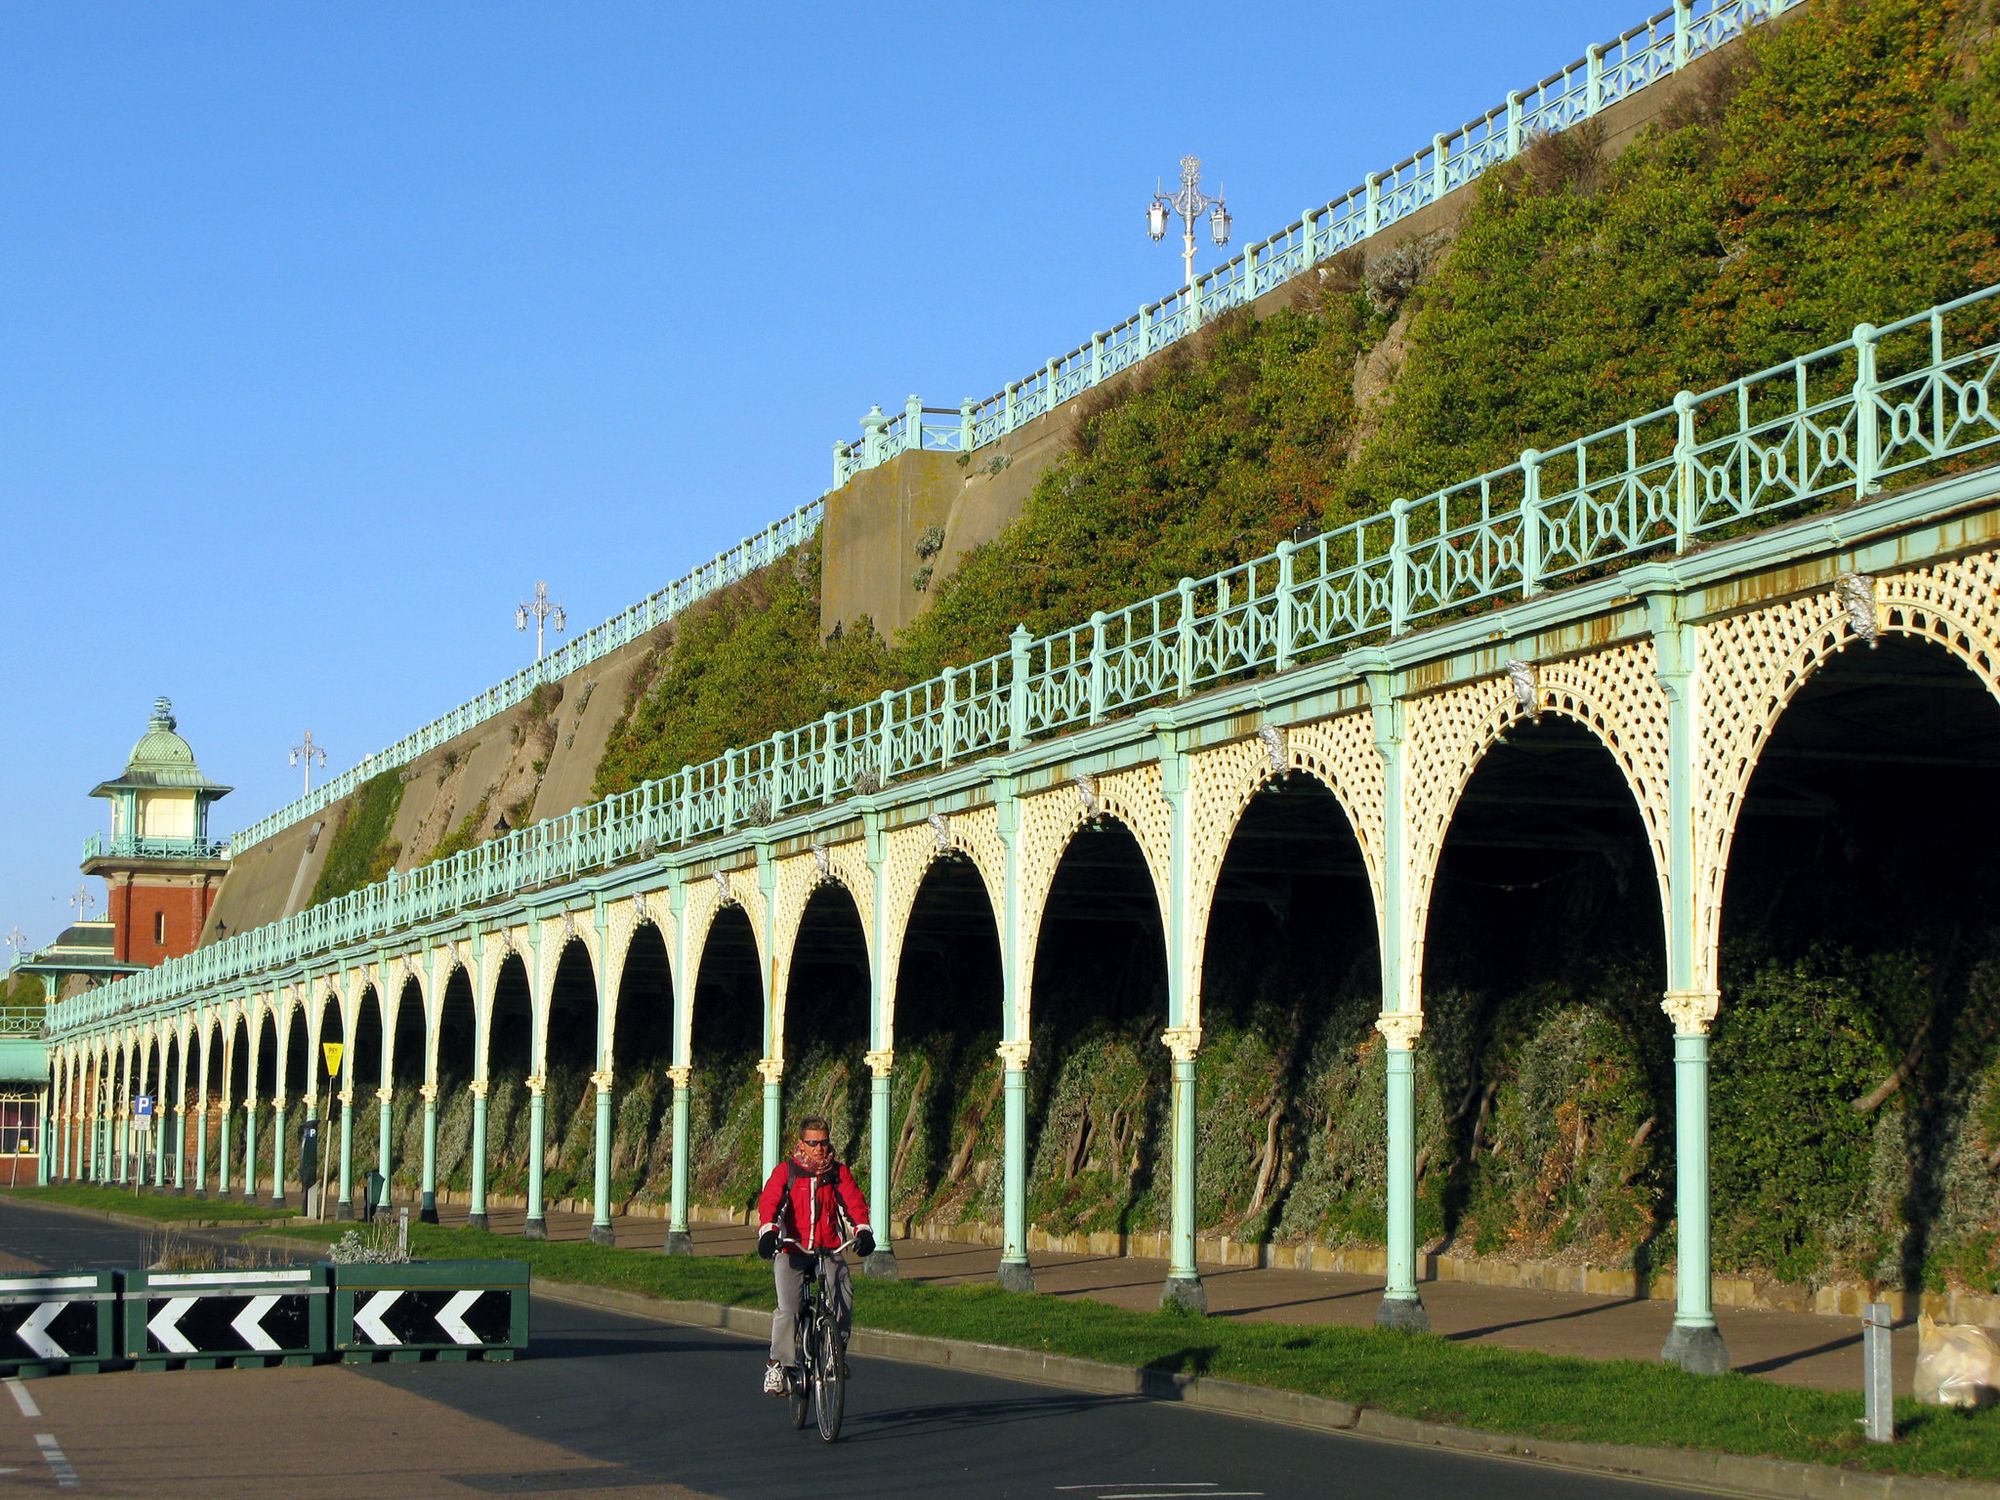 Picture of the Madeira Terrace Green Wall from 2008